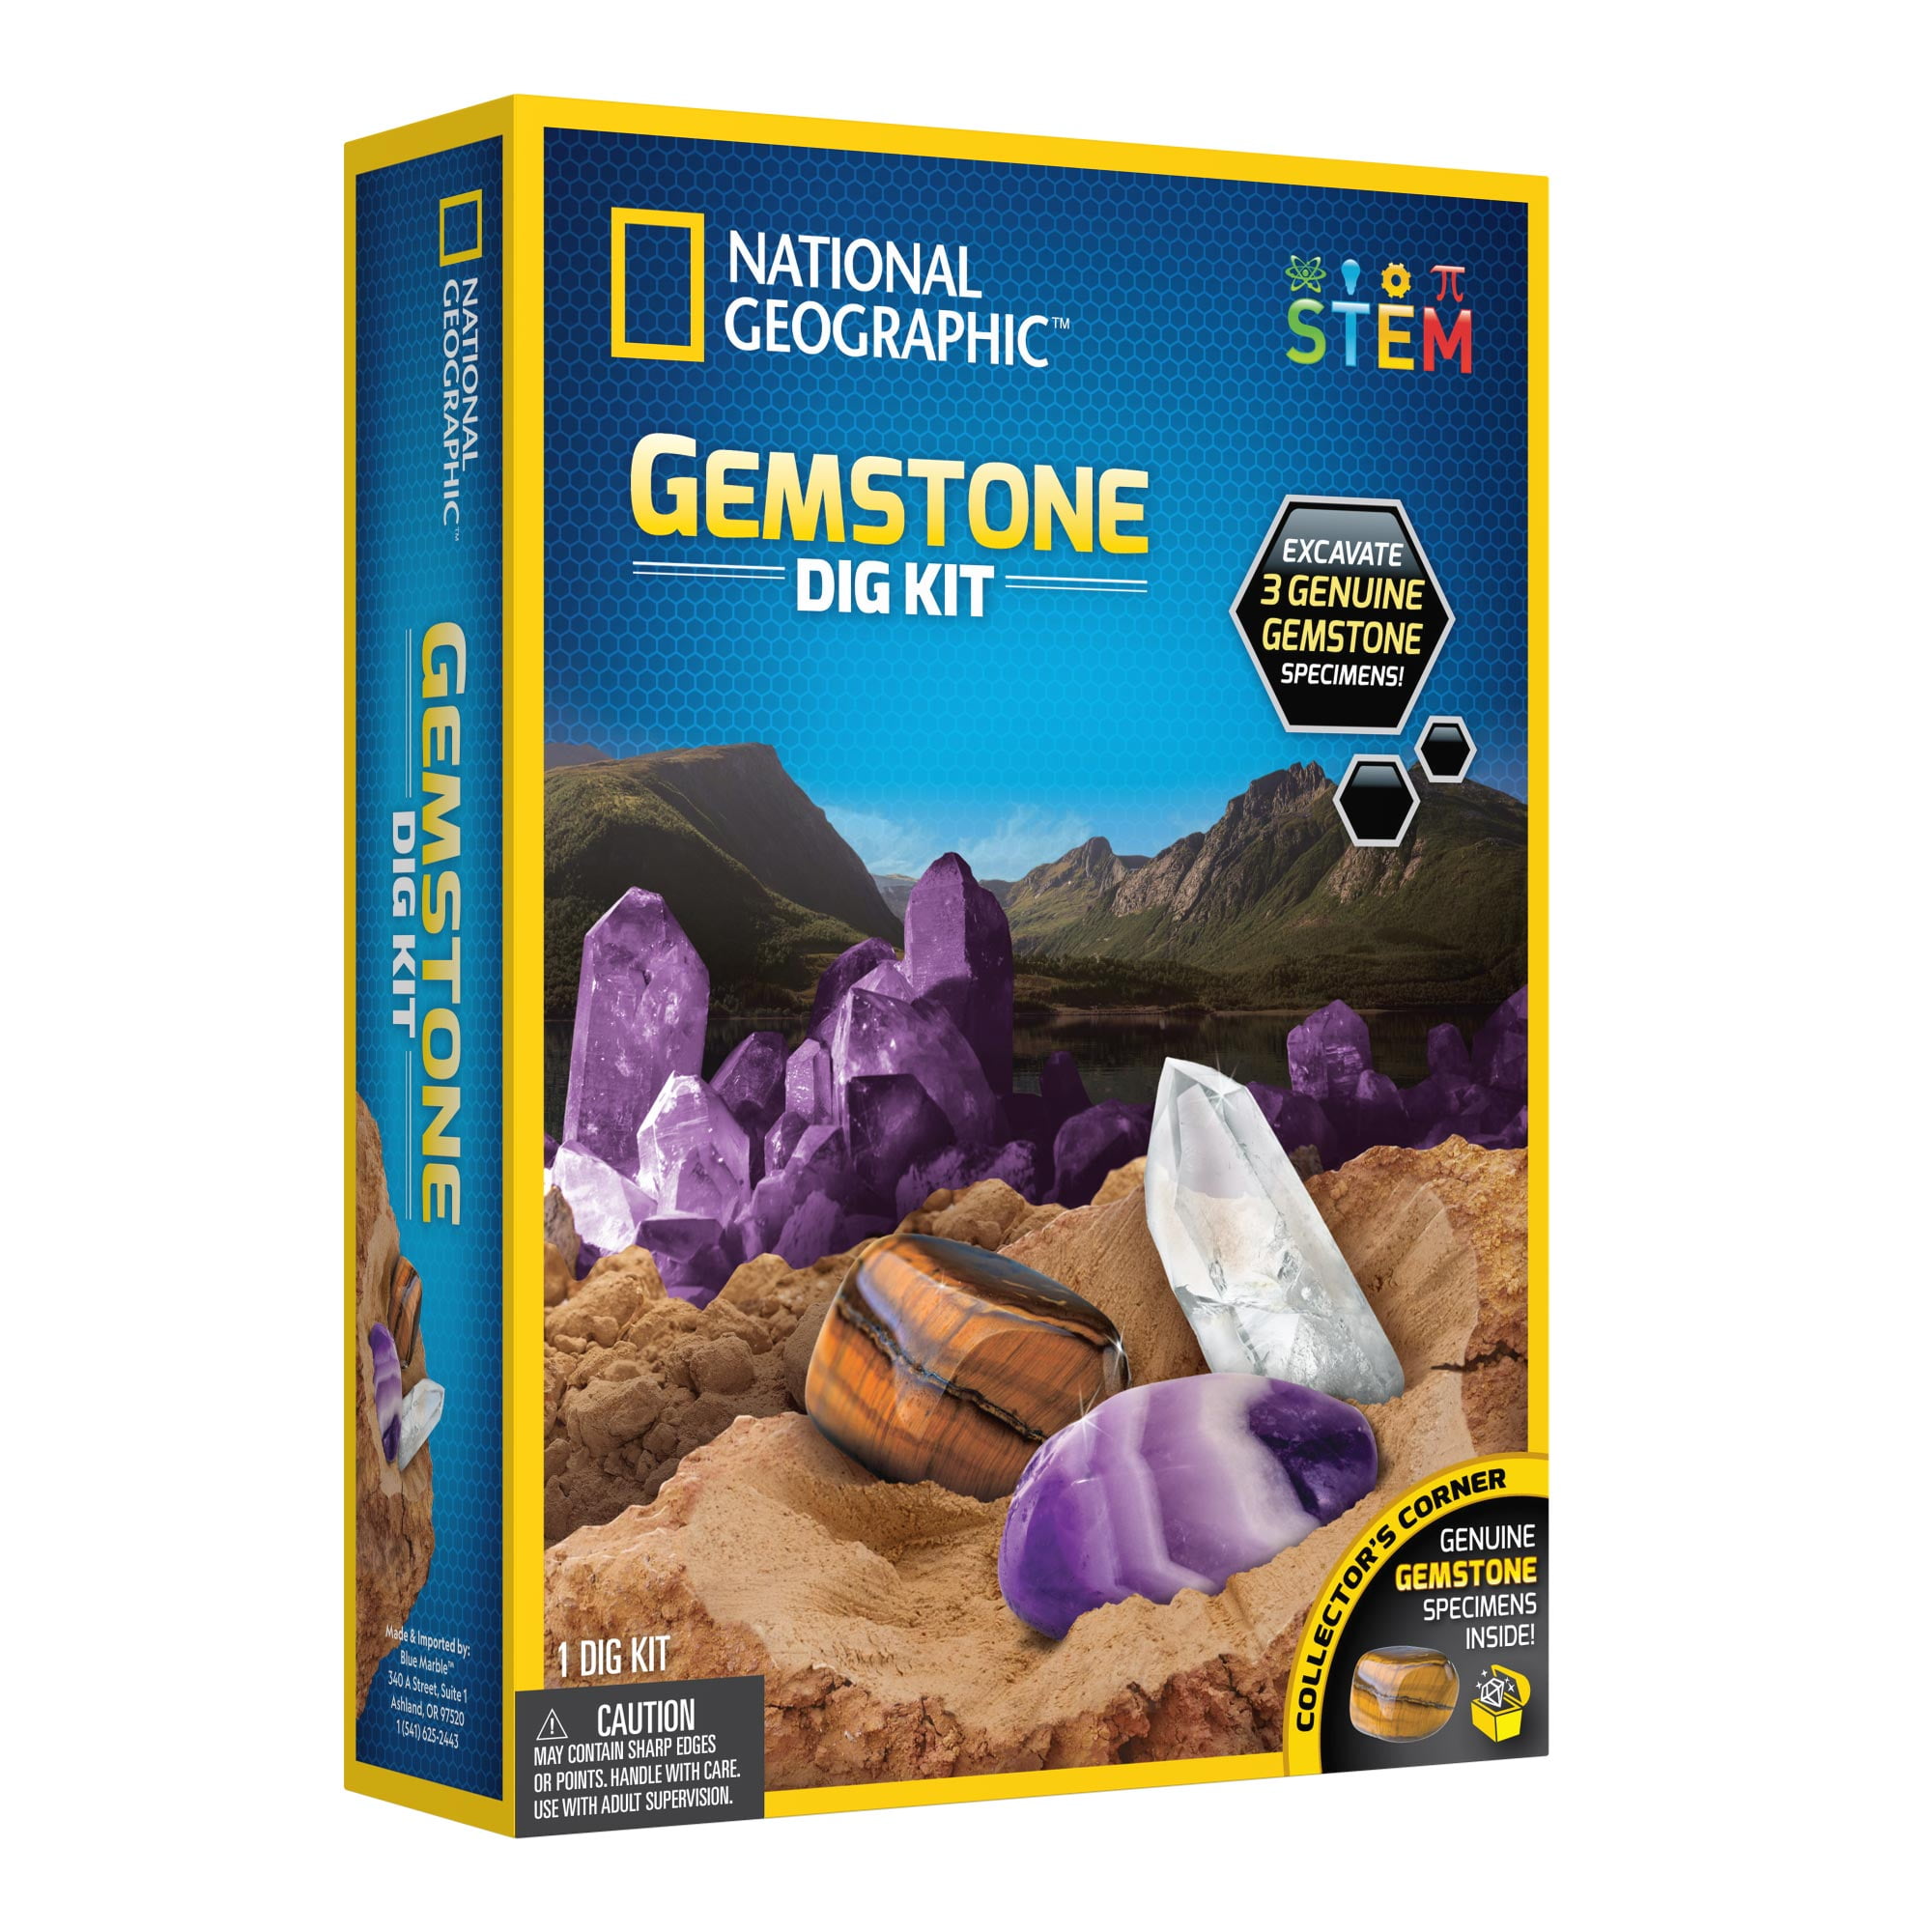 National Geographic Ice Mammoth Excavation Kit Good for sale online 